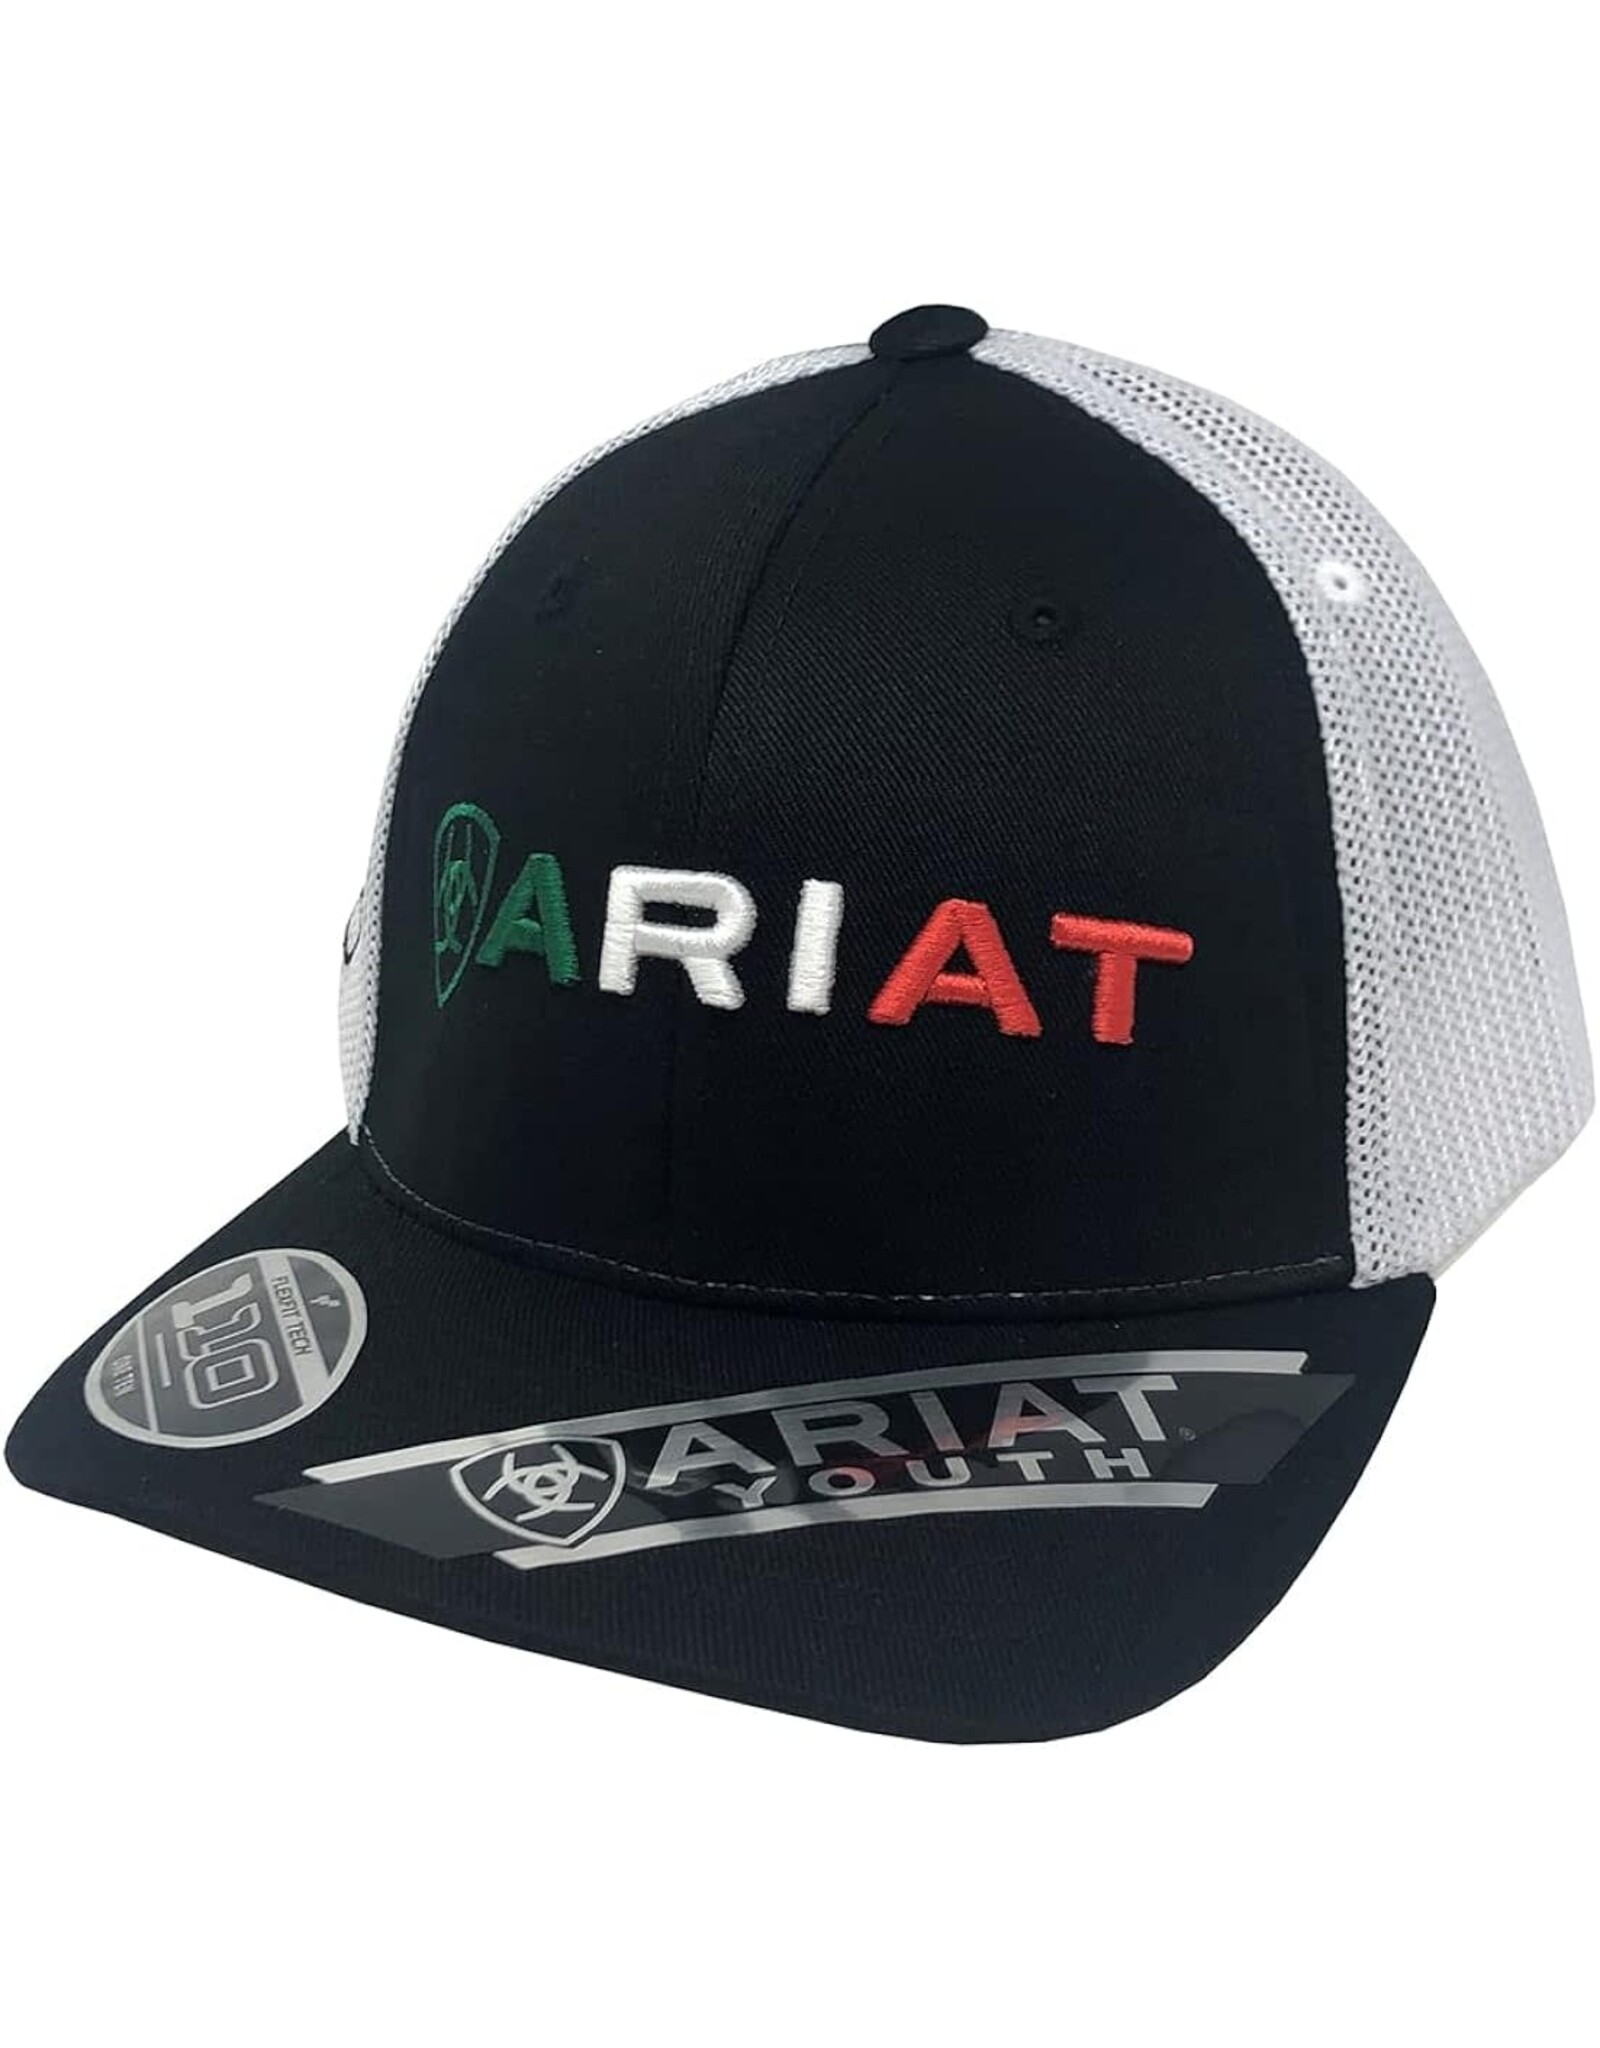 Ariat Ariat Youth Mexico Flag  Cap A300013901